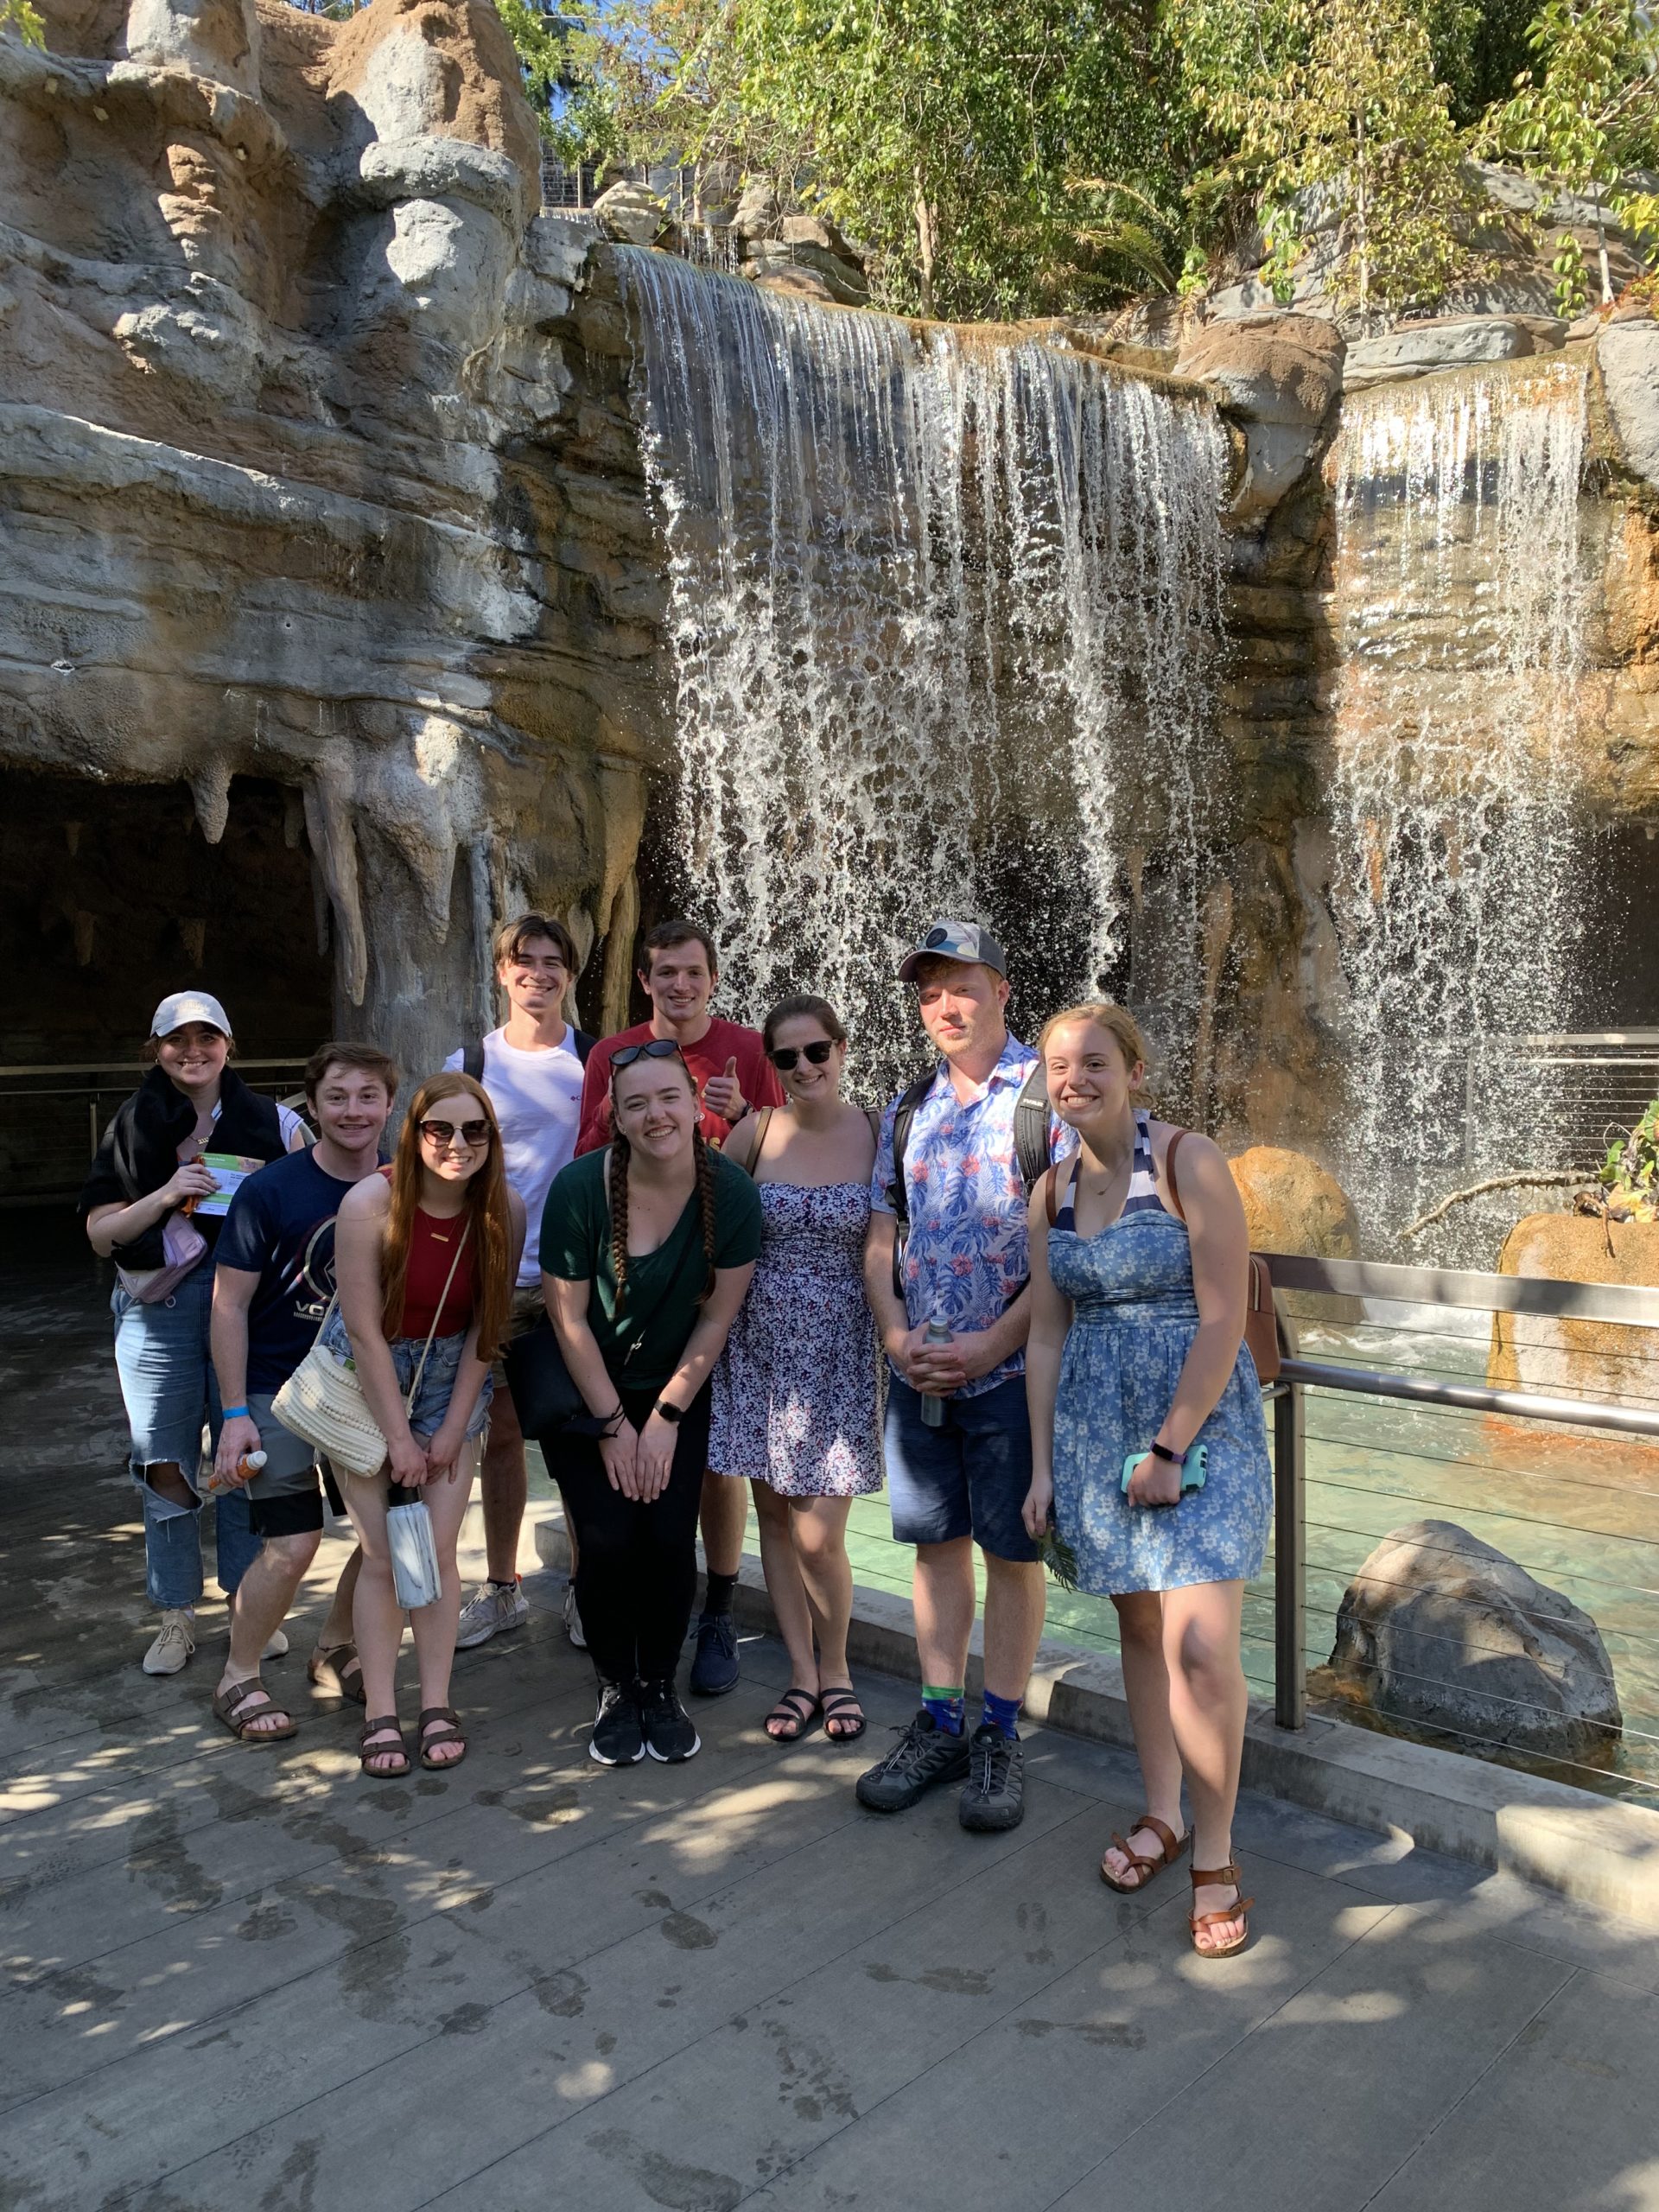 Miller lab visited the San Diego zoo during some leisure time